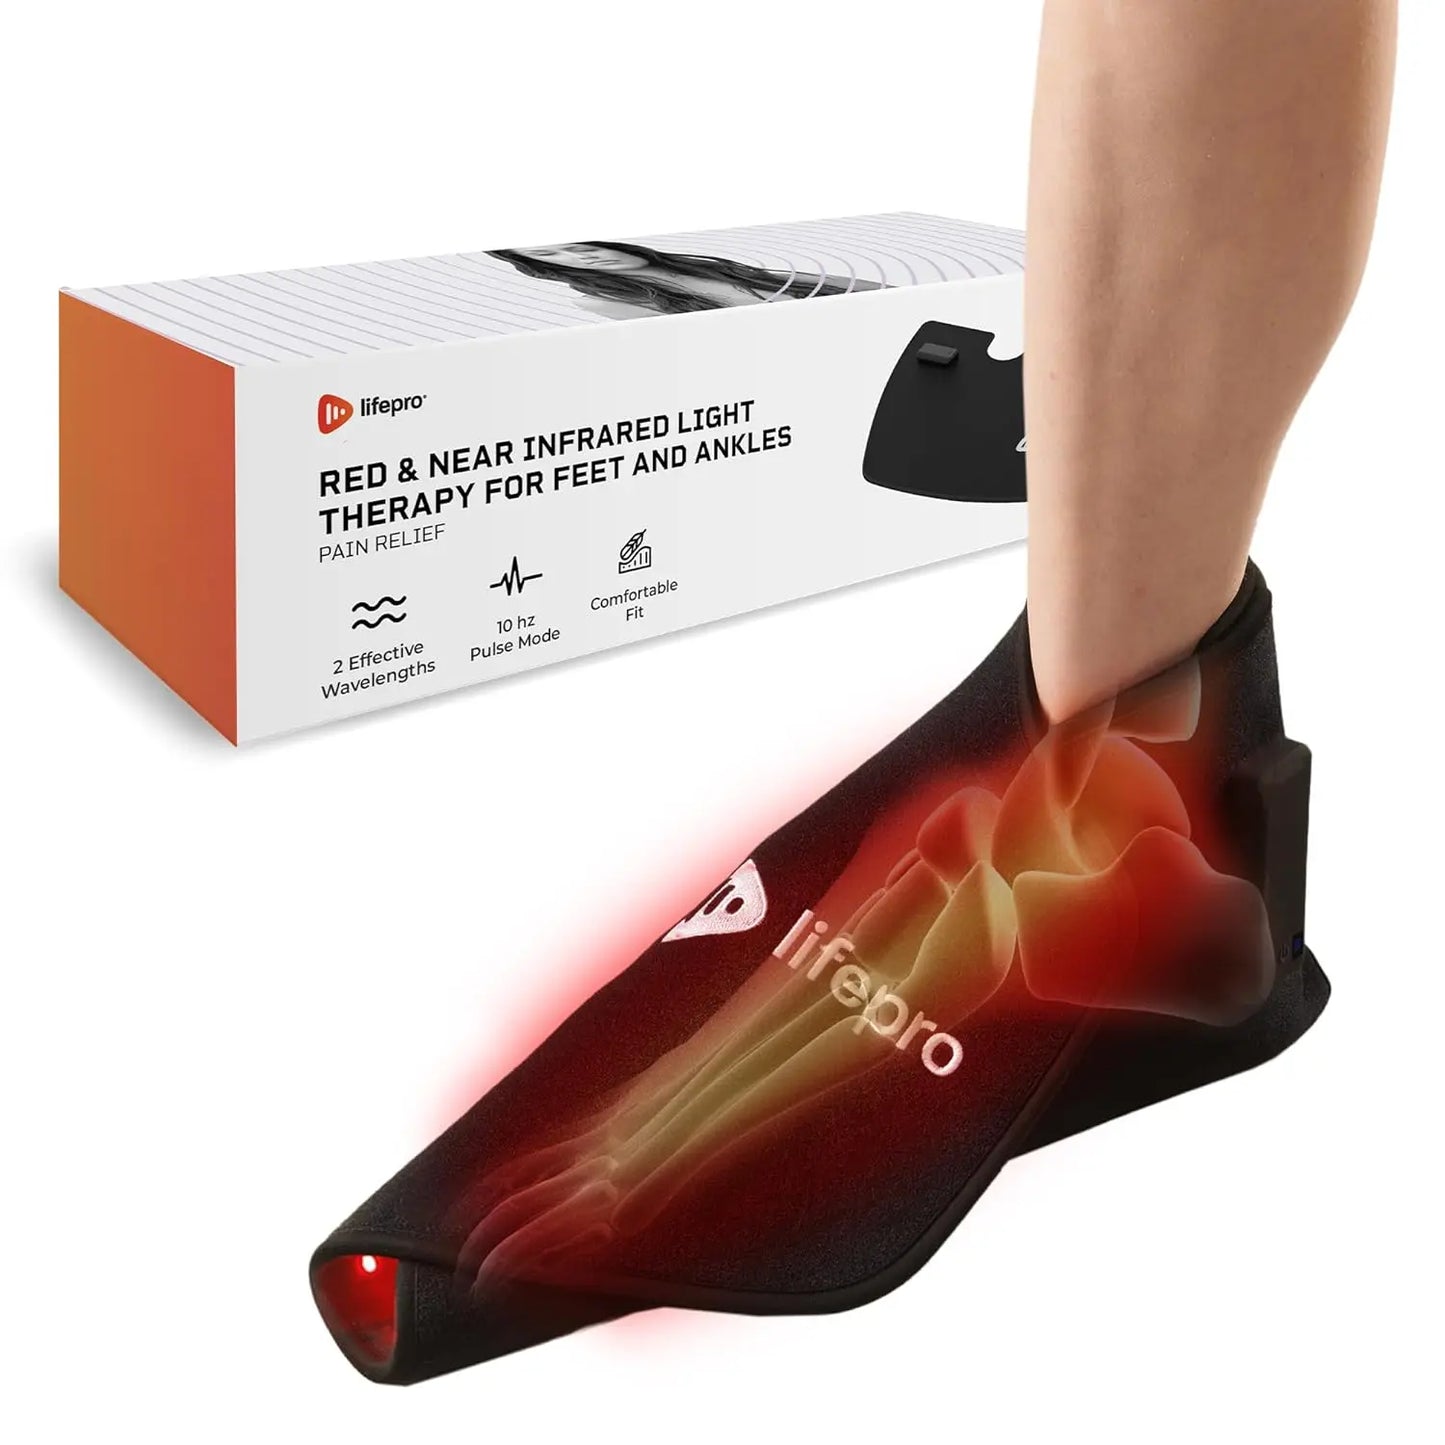 AllevaSole Pro Red Light Foot and Ankle Therapy